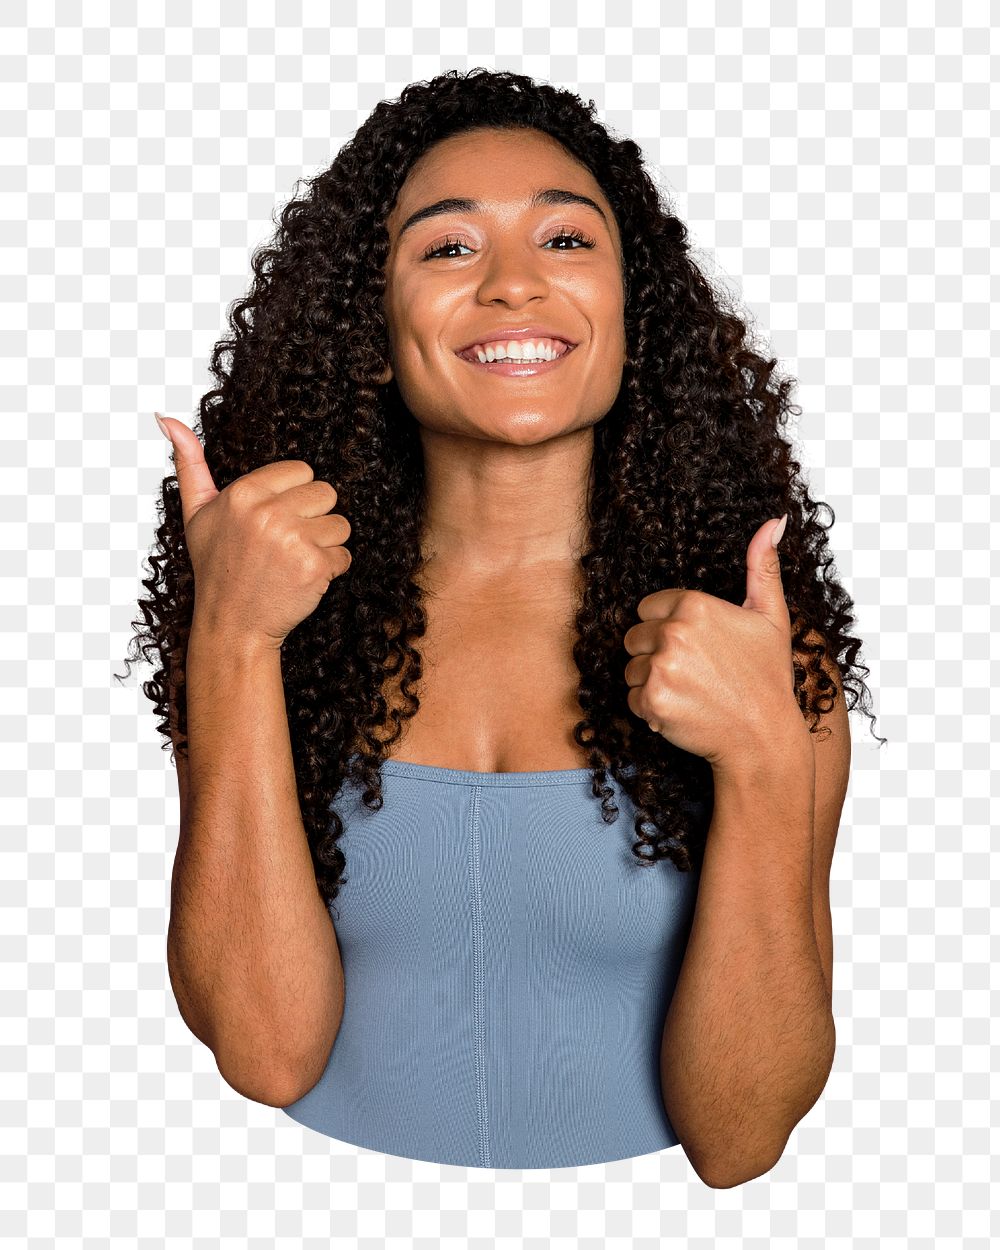 Png woman thumbs up sticker, transparent background